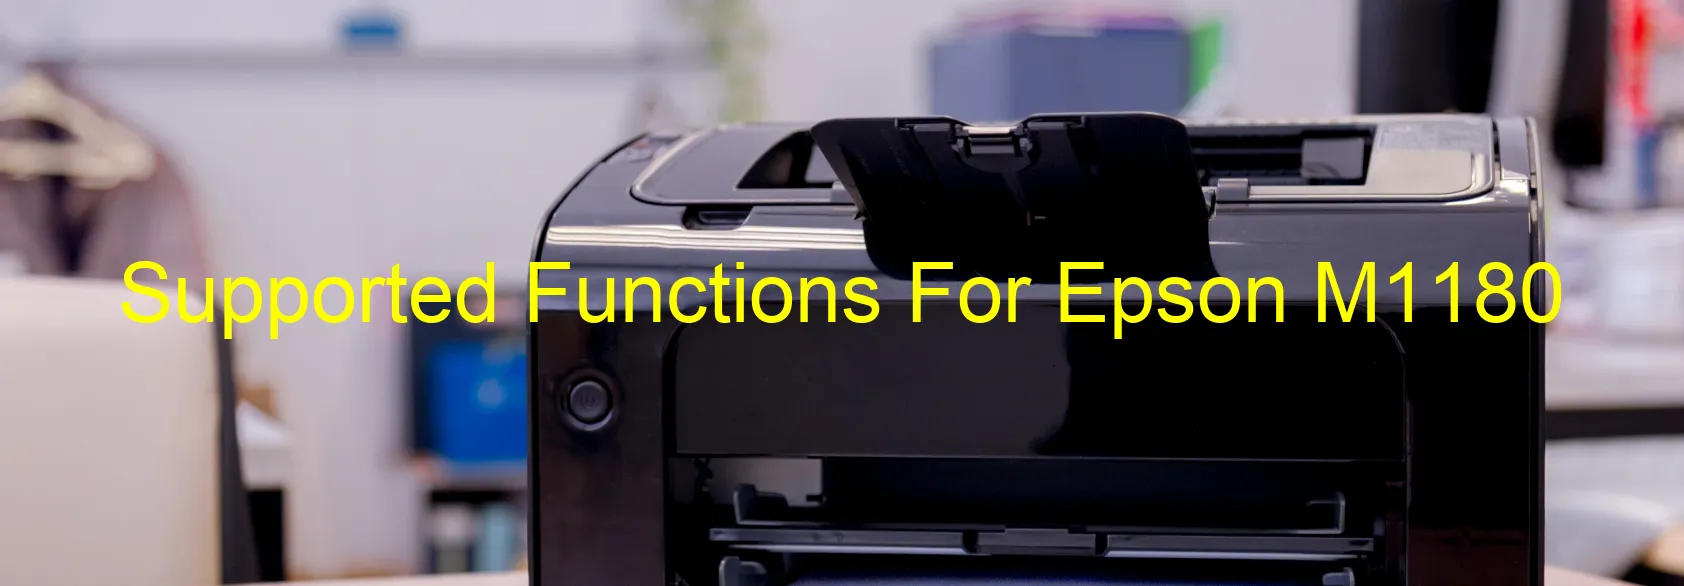 supported-functions-for-epson-m1180.webp